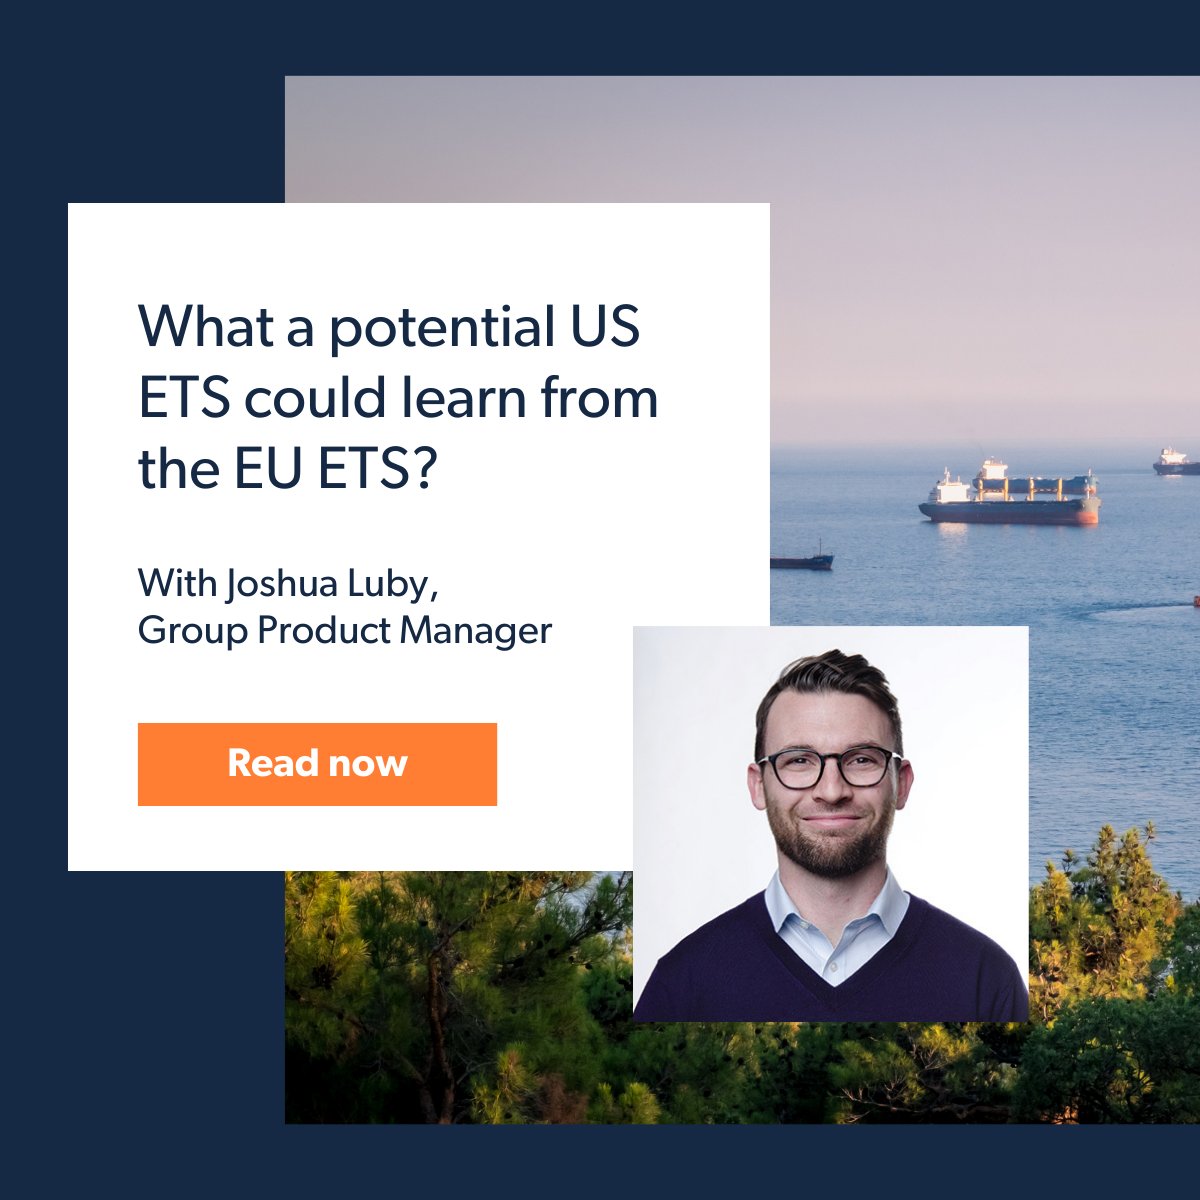 EU ETS is quickly making an impact in the maritime world. Will the US or other regions follow suit? And if so, what learnings could we apply? Read the full article here: hubs.ly/Q02rb57b0 #EUETS #shippingIndustry #environmentalRegulations #CMAshippingWeek